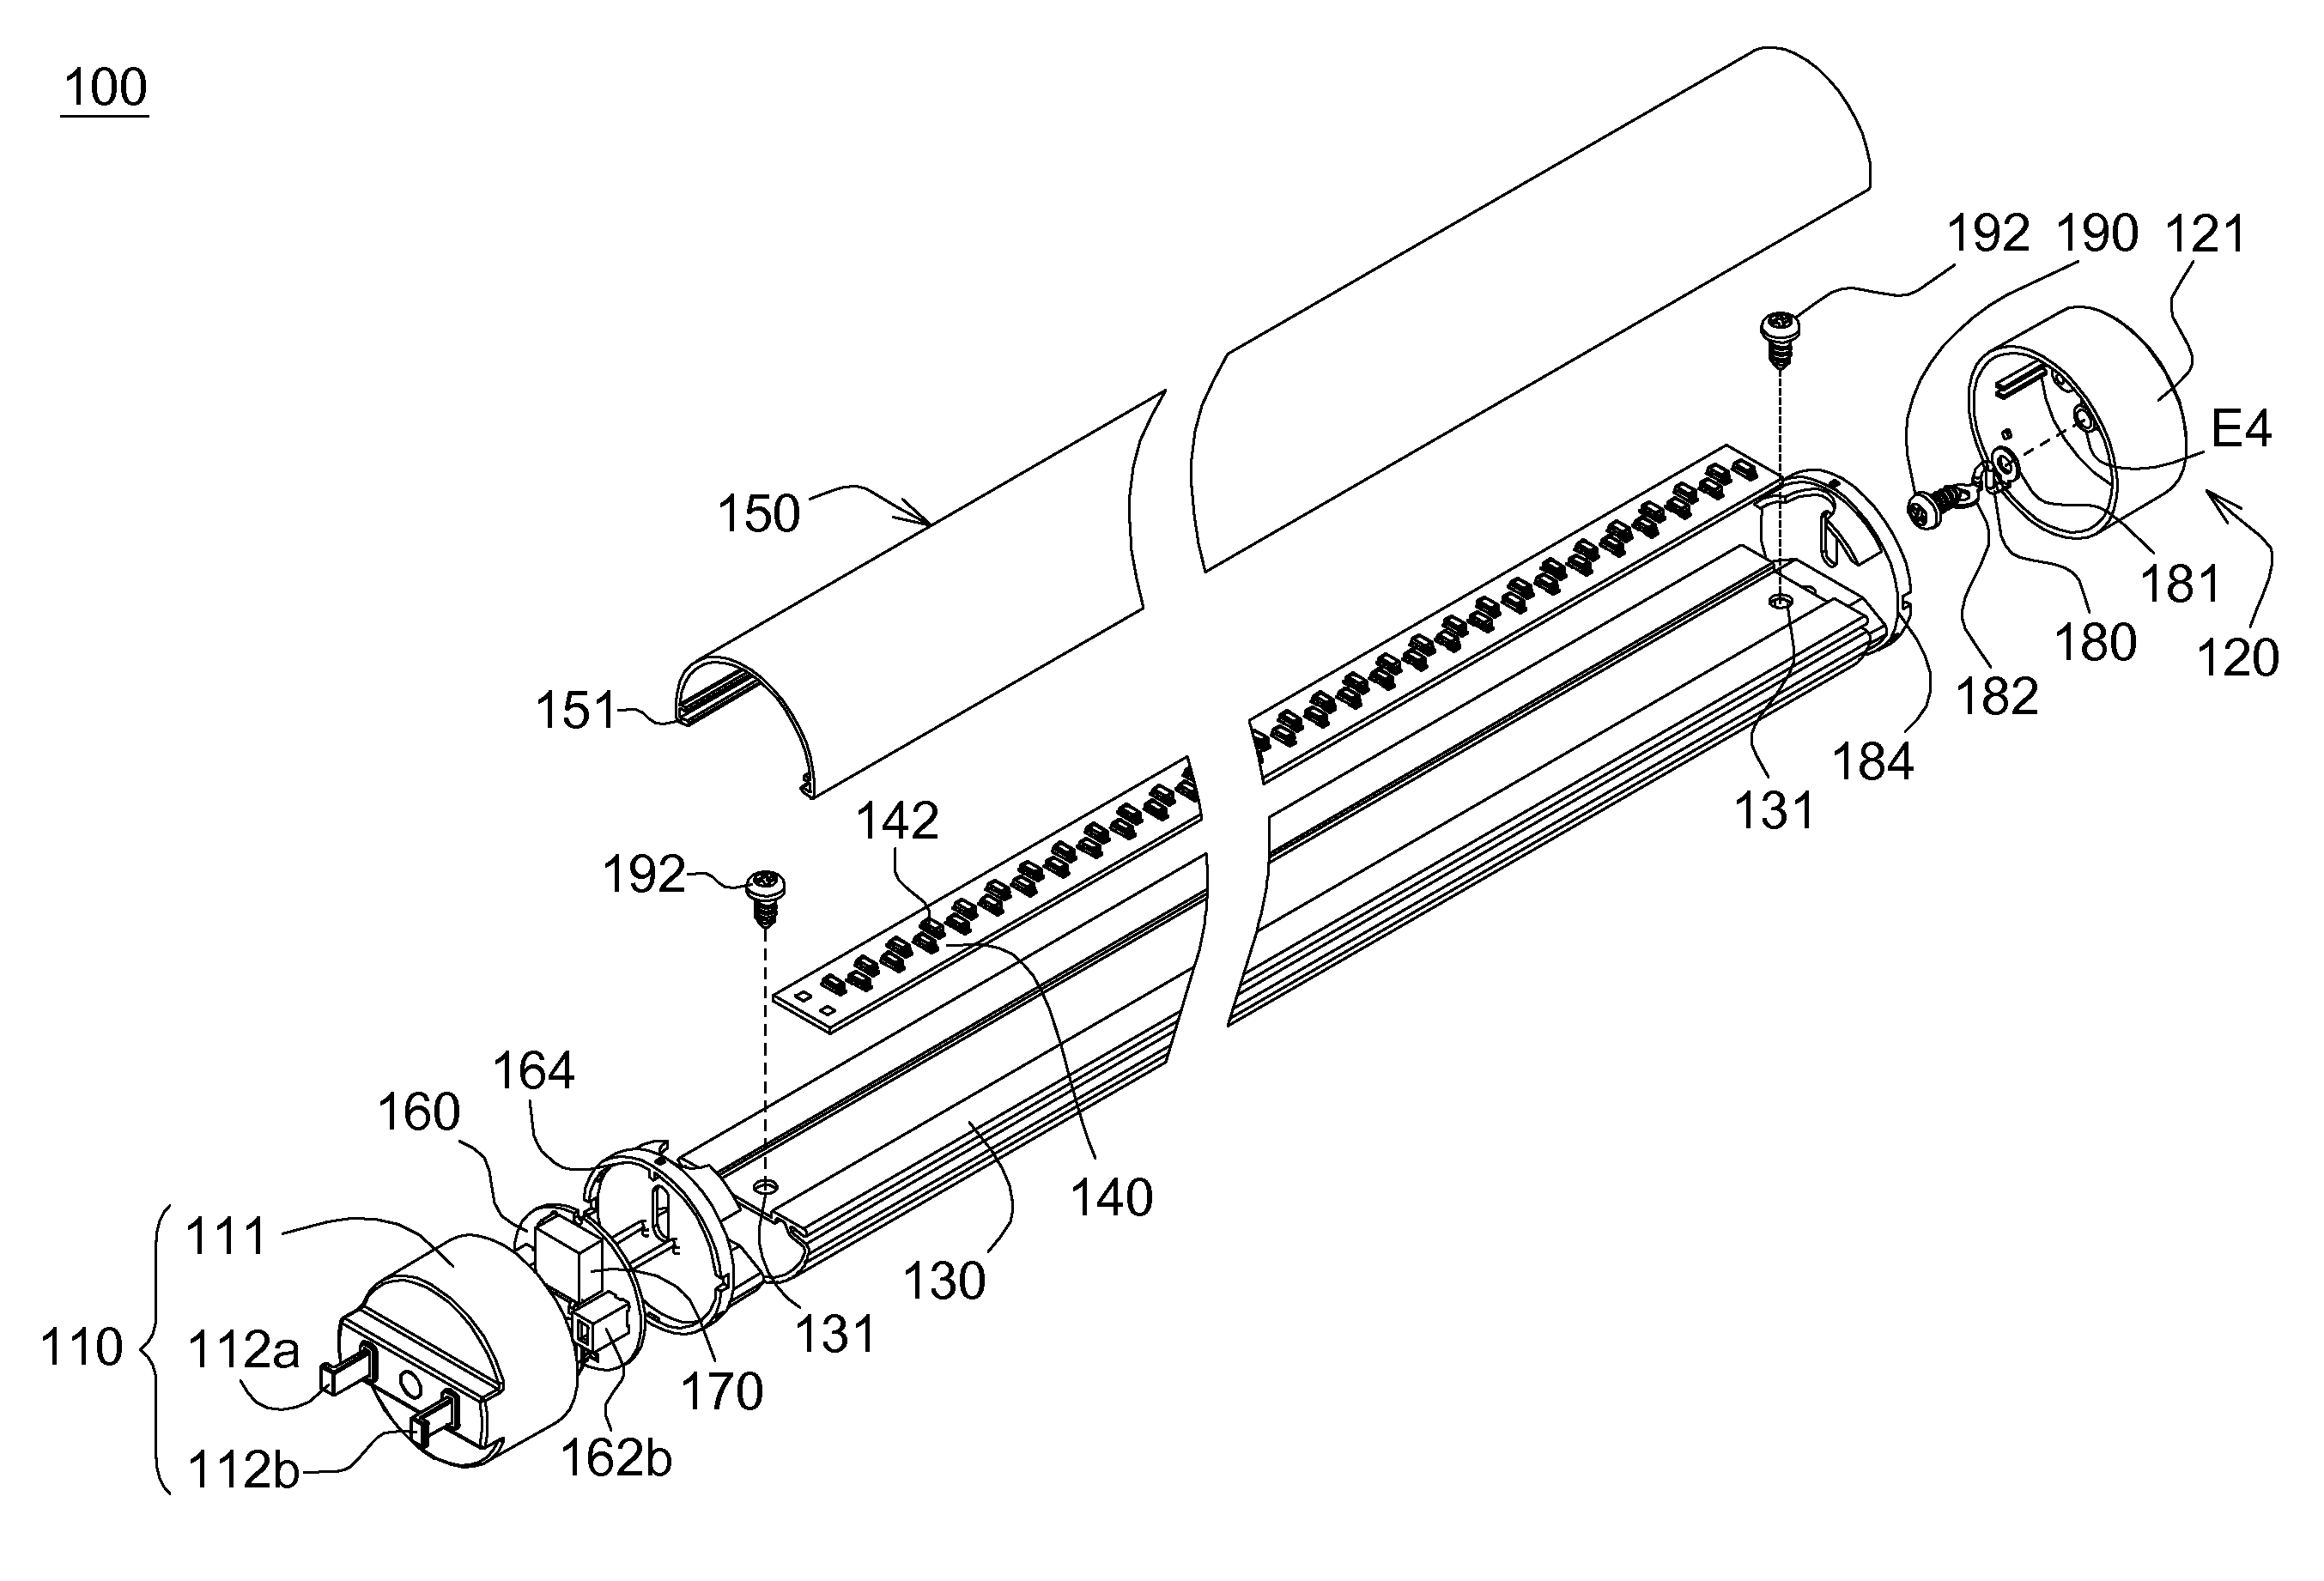 Lamp tube structure and assembly thereof